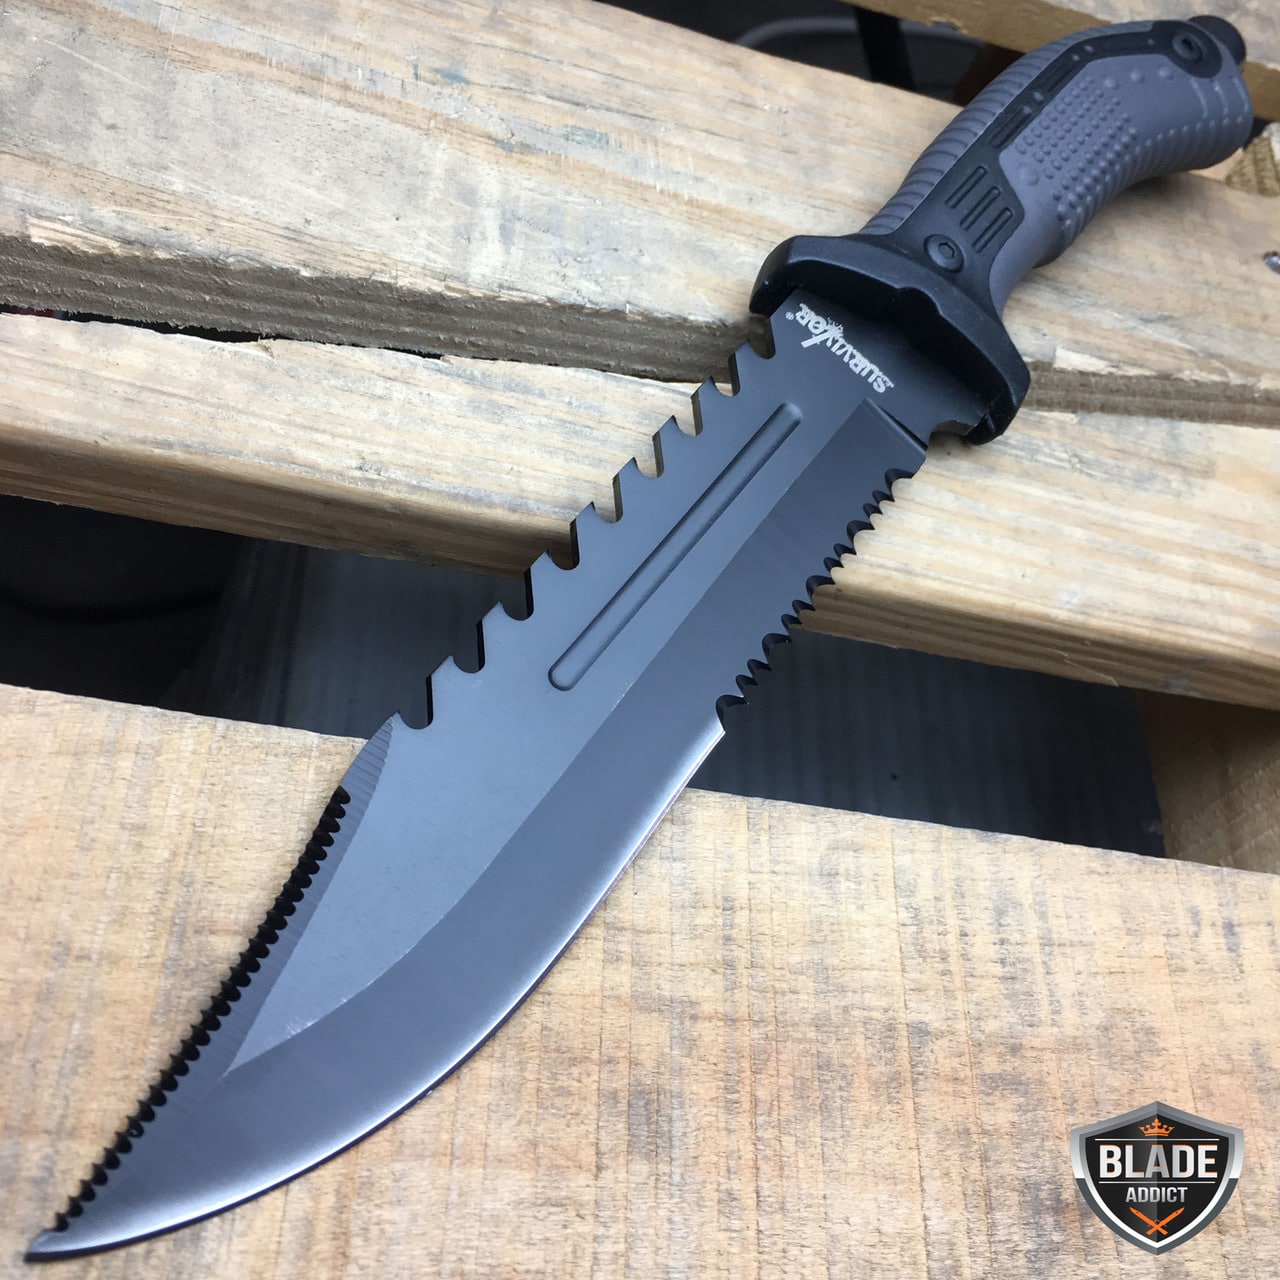 13" TACTICAL SURVIVAL Rambo Army Bowie FIXED BLADE KNIFE Hunting w/ SHEATH NEW